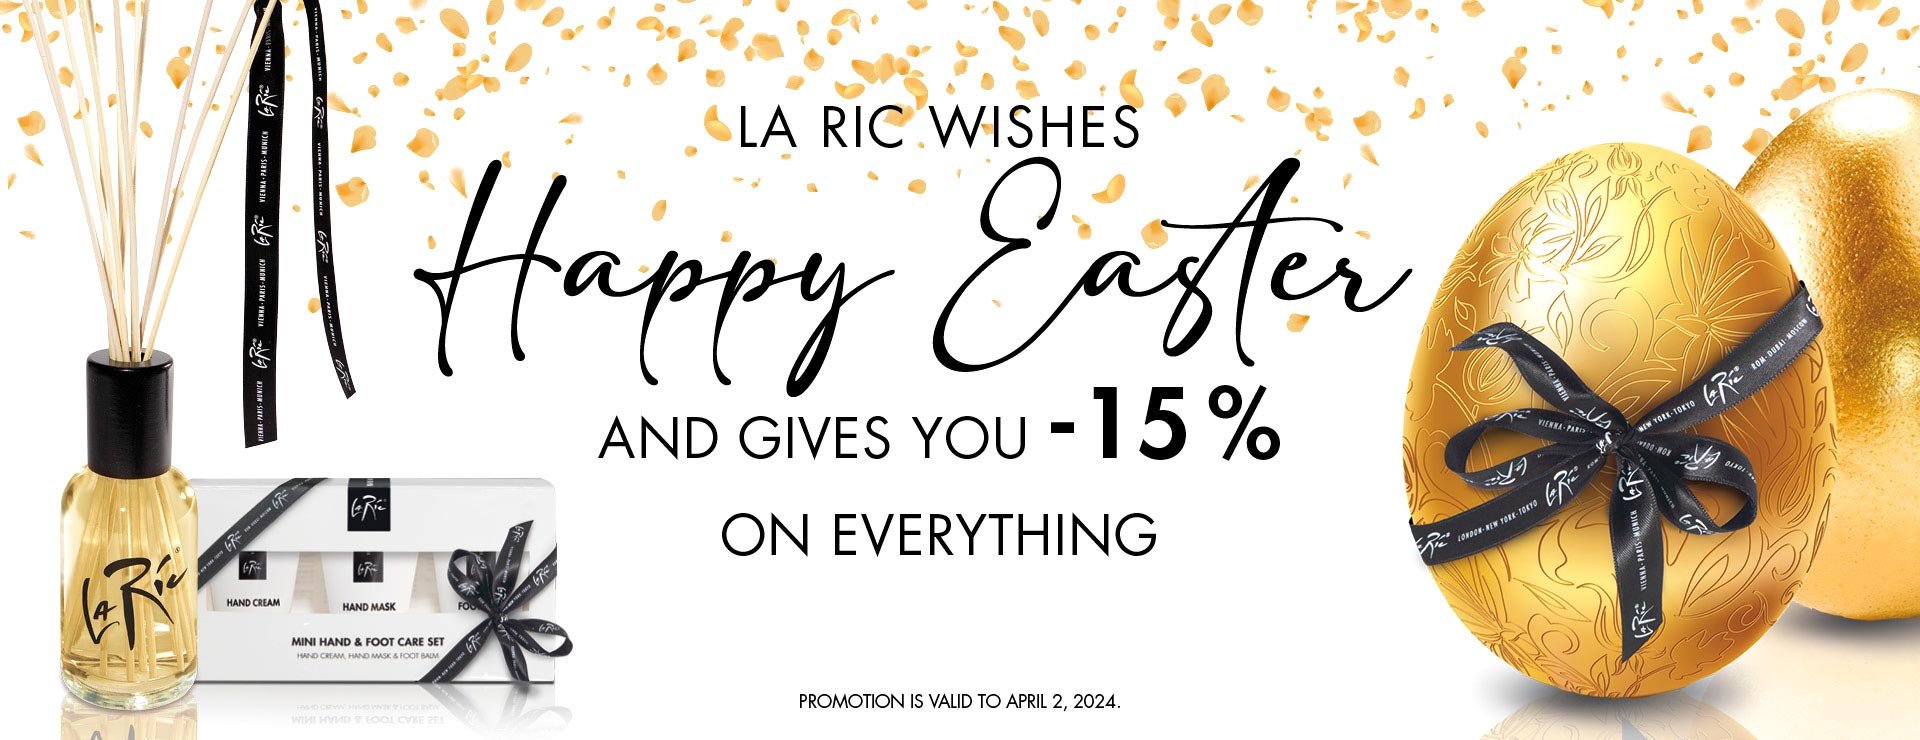 La Ric wishes Happy Easter and gives you 15% off everything until April 2.